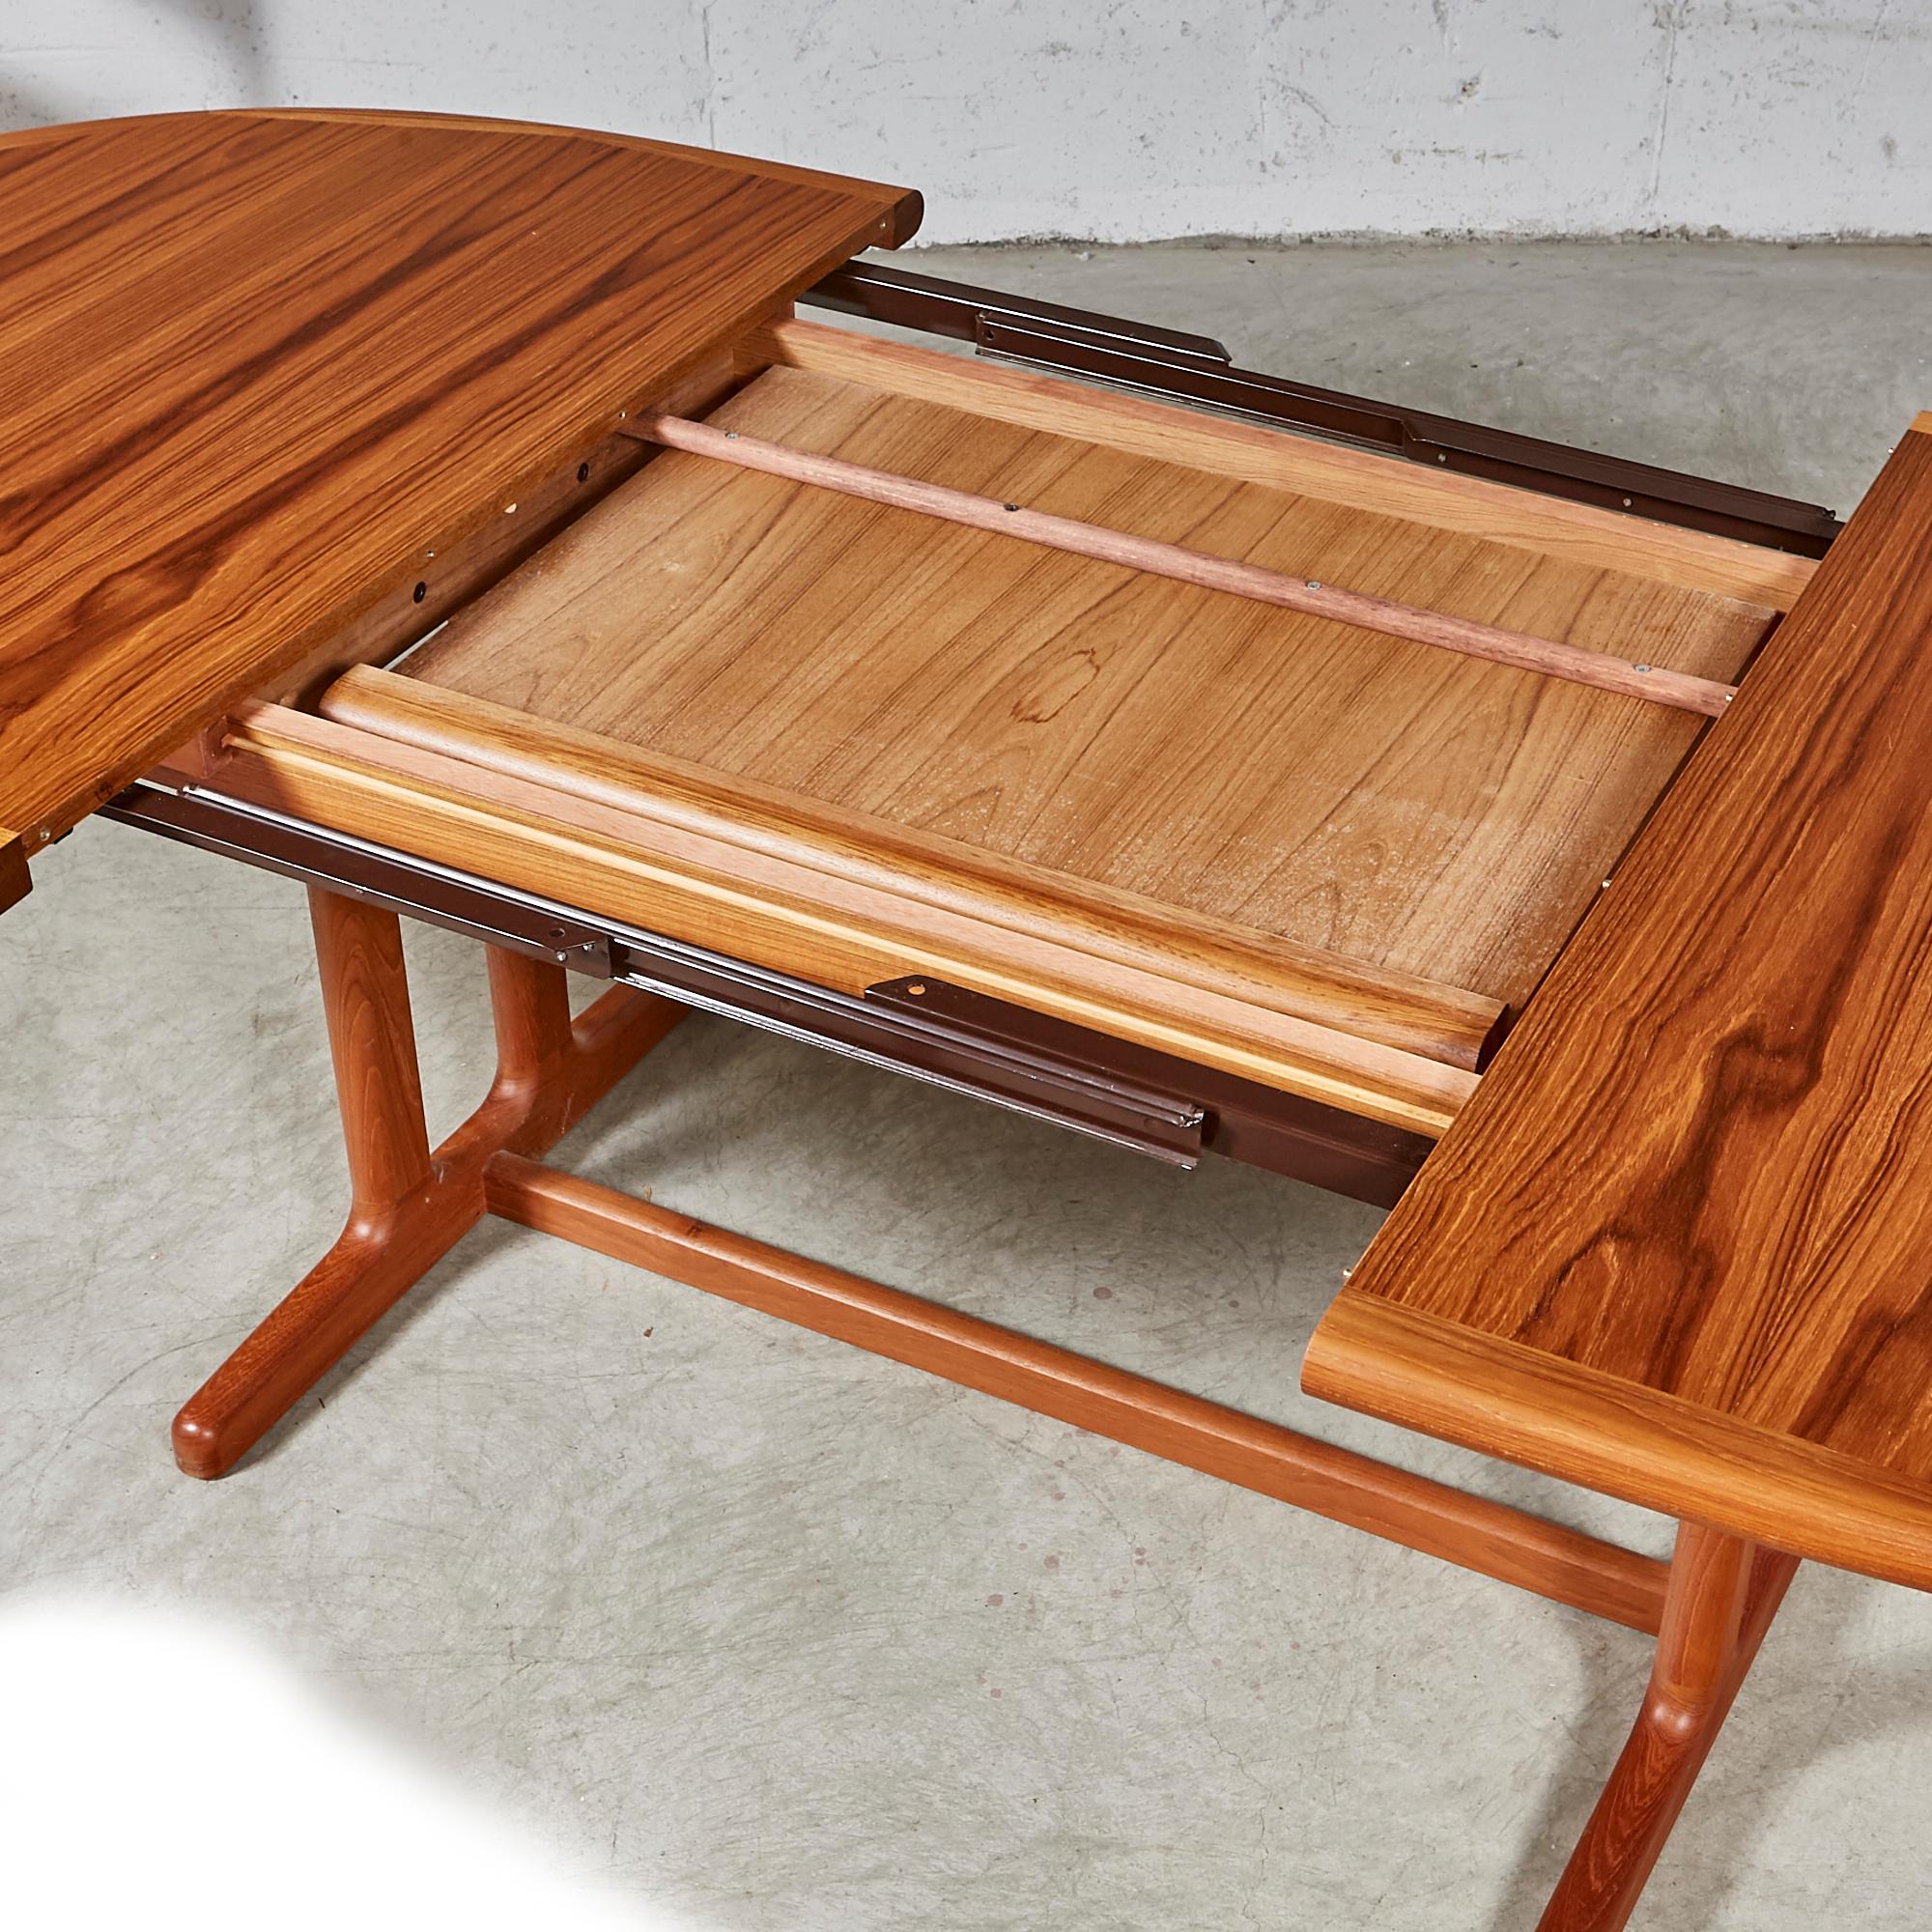 1970s Teak Dining Table and Chairs In Good Condition For Sale In Amherst, NH